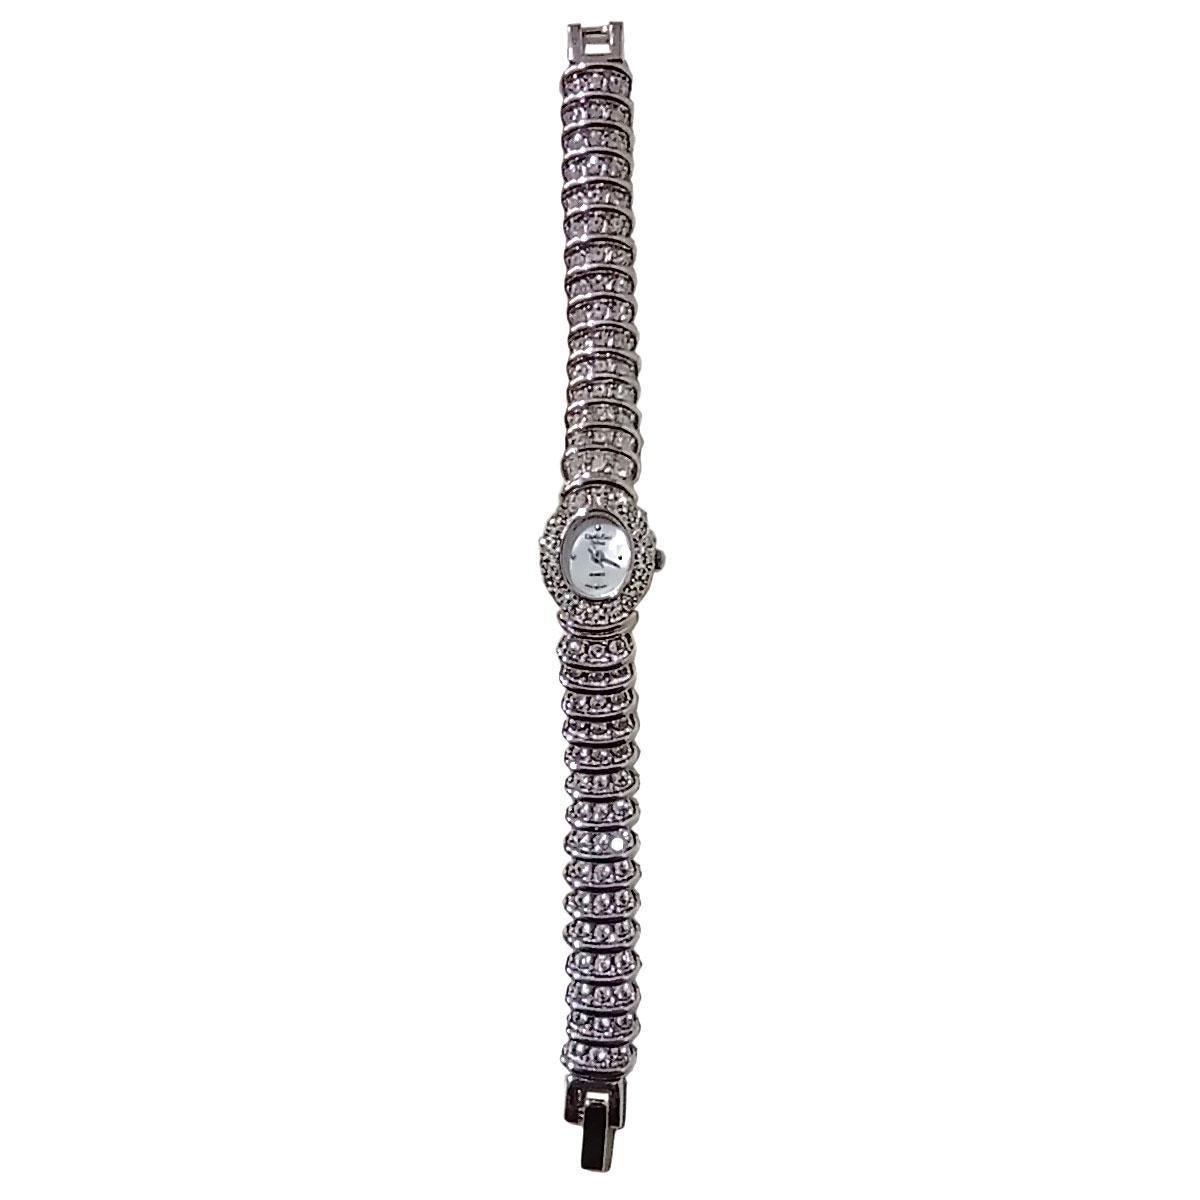 Amazing Carlo Zini Milano jewel watch 
One of the greatest bijoux creators of all times
Vintage from late 80's / early 90's
Perfectly working
Japanese quartz movement
Rhodium metal strap
Swarovski crystals
Non allergenic
Wrist measurement 17 cm